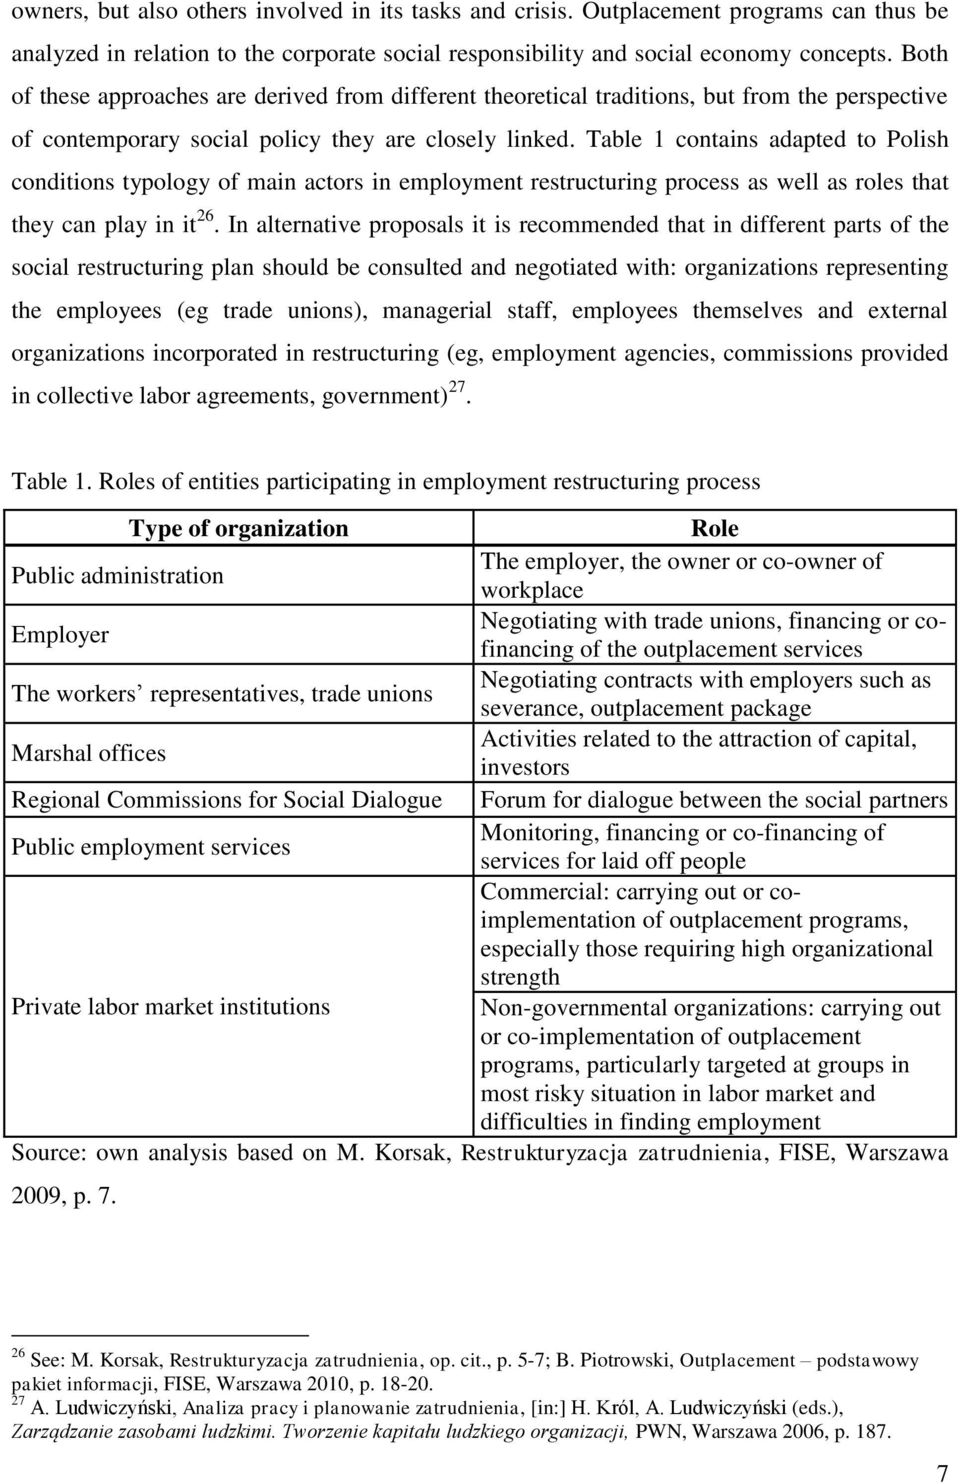 Table 1 contains adapted to Polish conditions typology of main actors in employment restructuring process as well as roles that they can play in it 26.